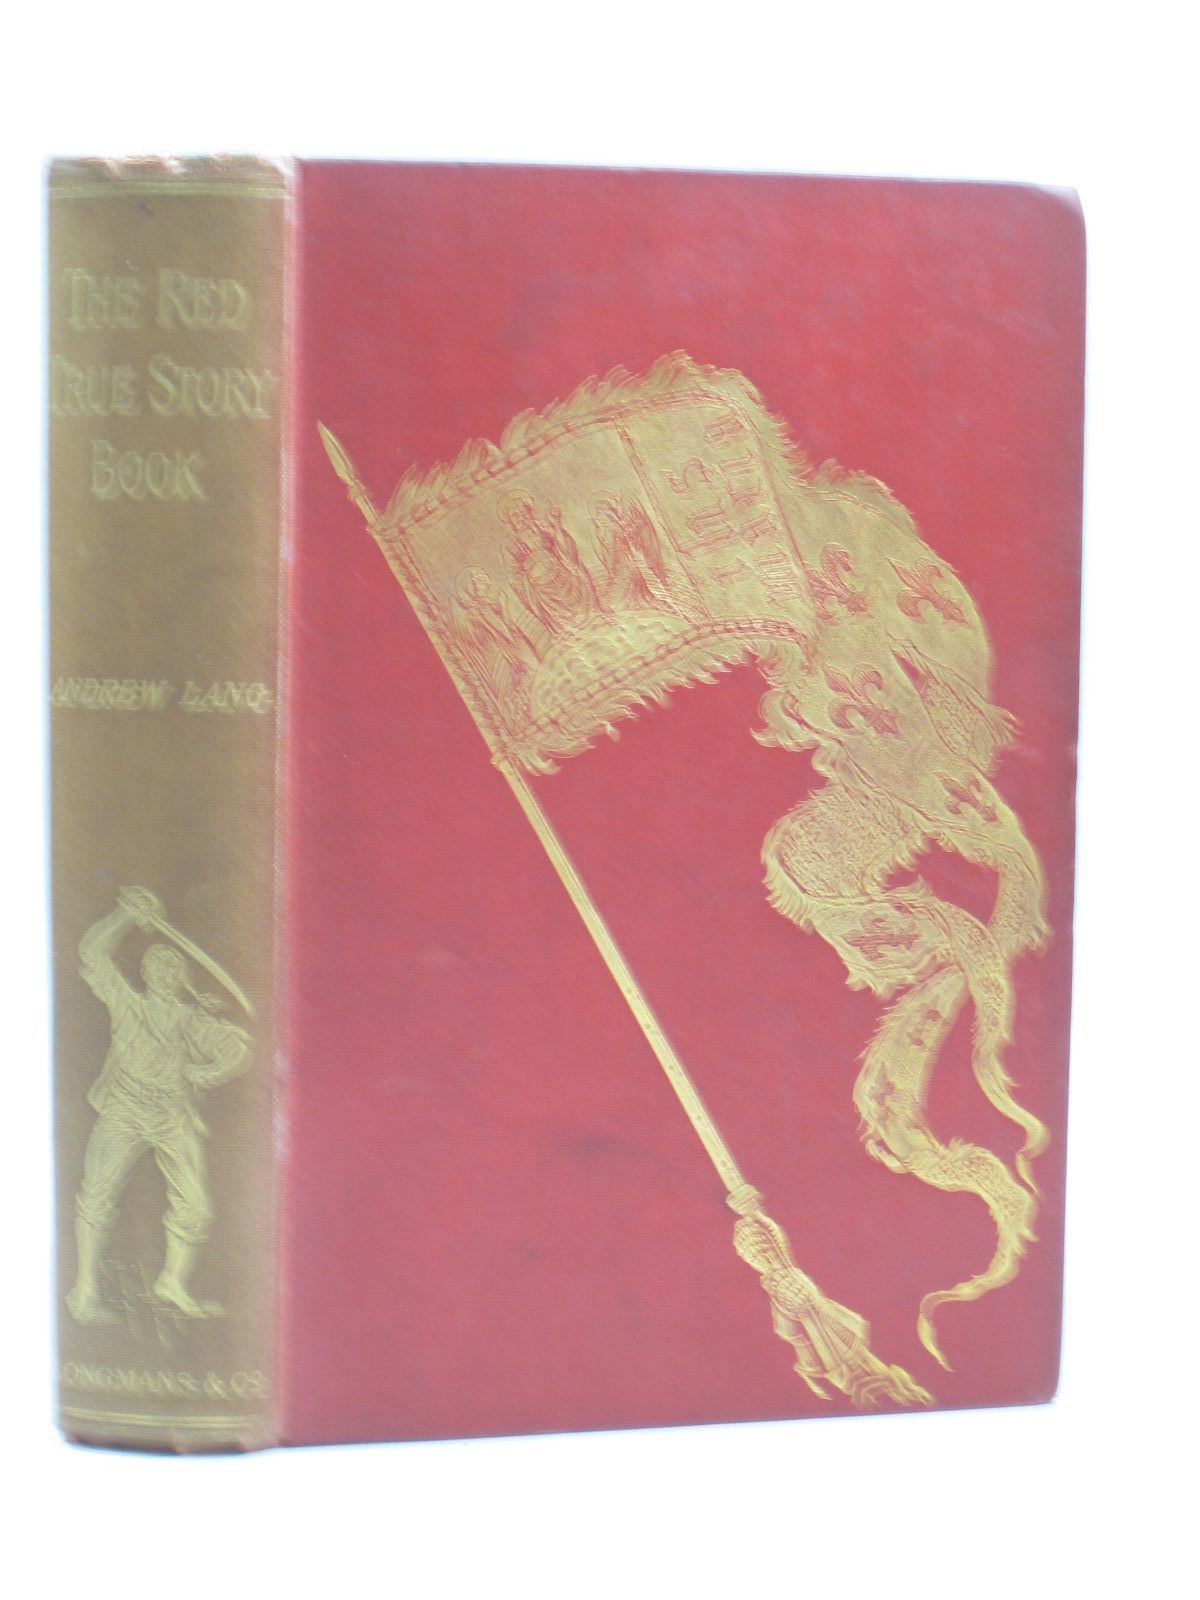 Photo of THE RED TRUE STORY BOOK written by Lang, Andrew illustrated by Ford, H.J. published by Longmans, Green & Co. (STOCK CODE: 1403653)  for sale by Stella & Rose's Books